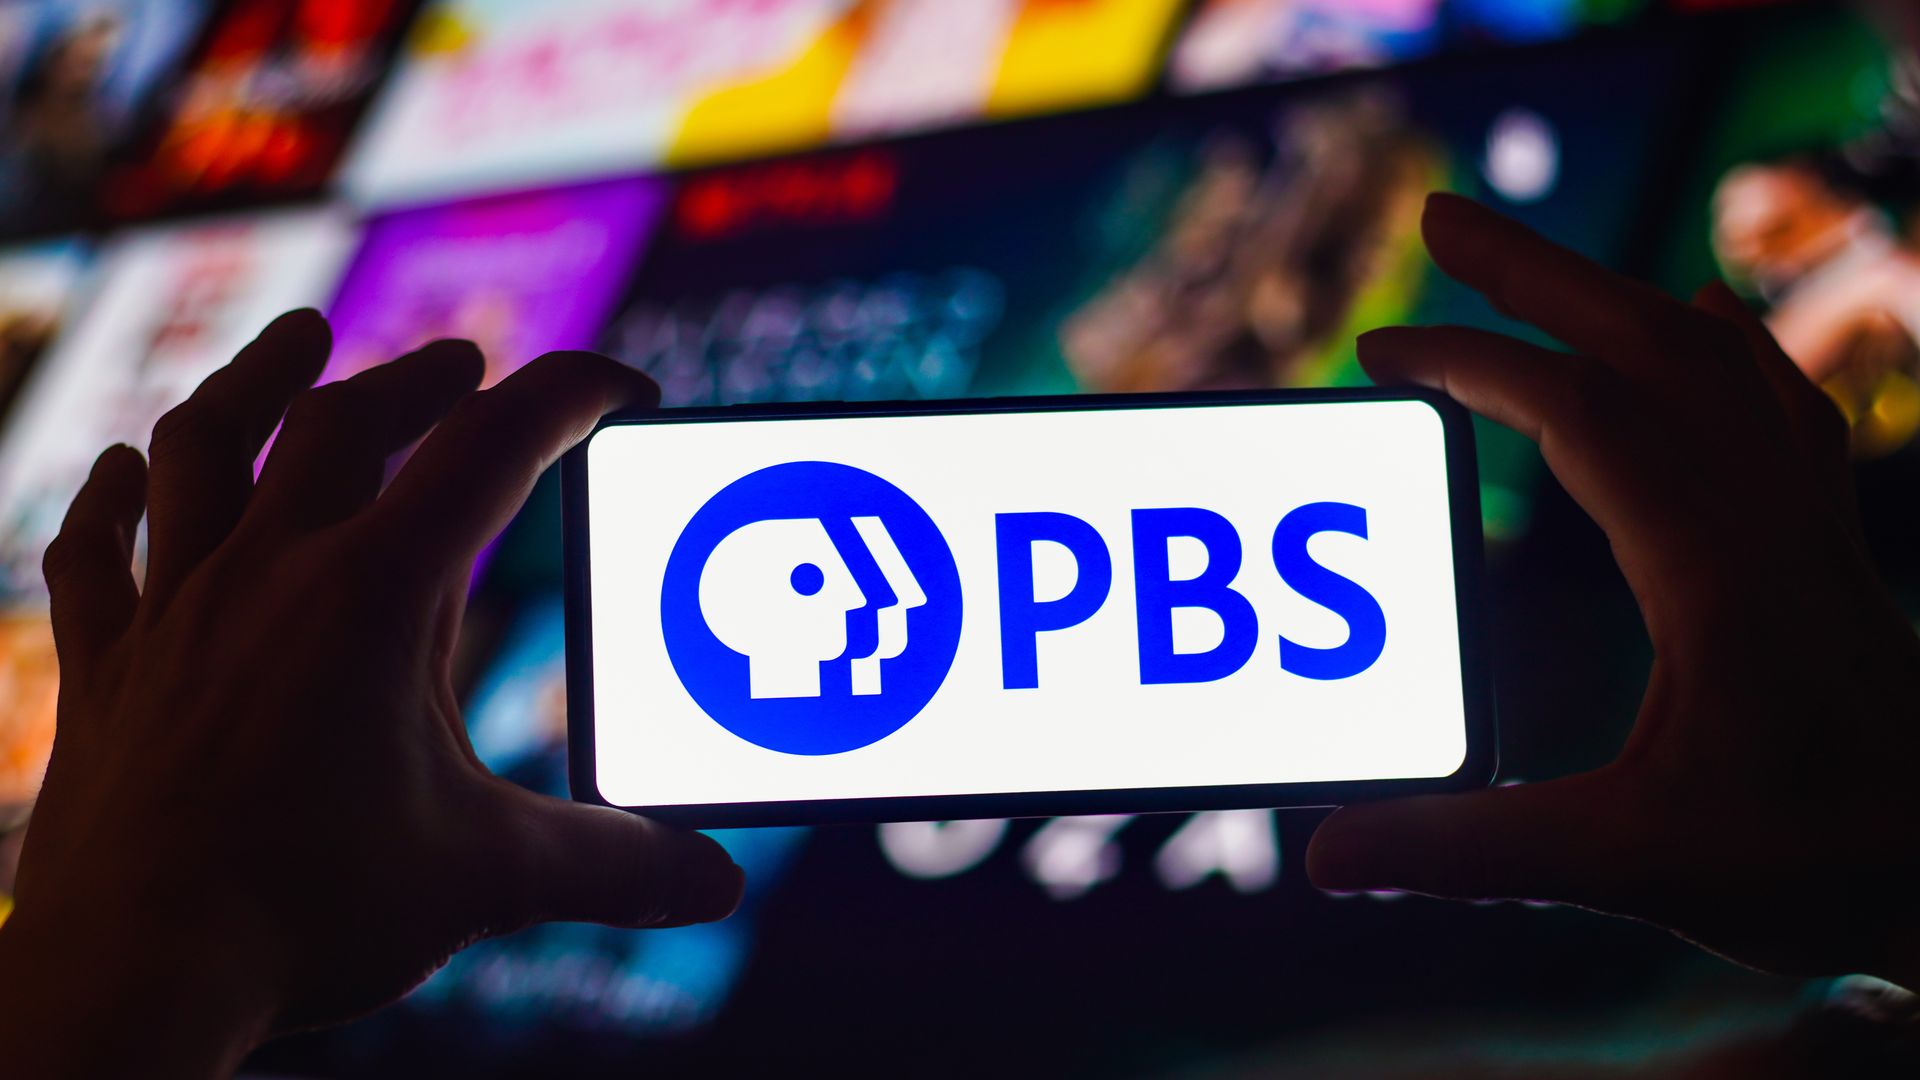 PBS stops tweeting after Musk adds “government-funded” label (axios.com)